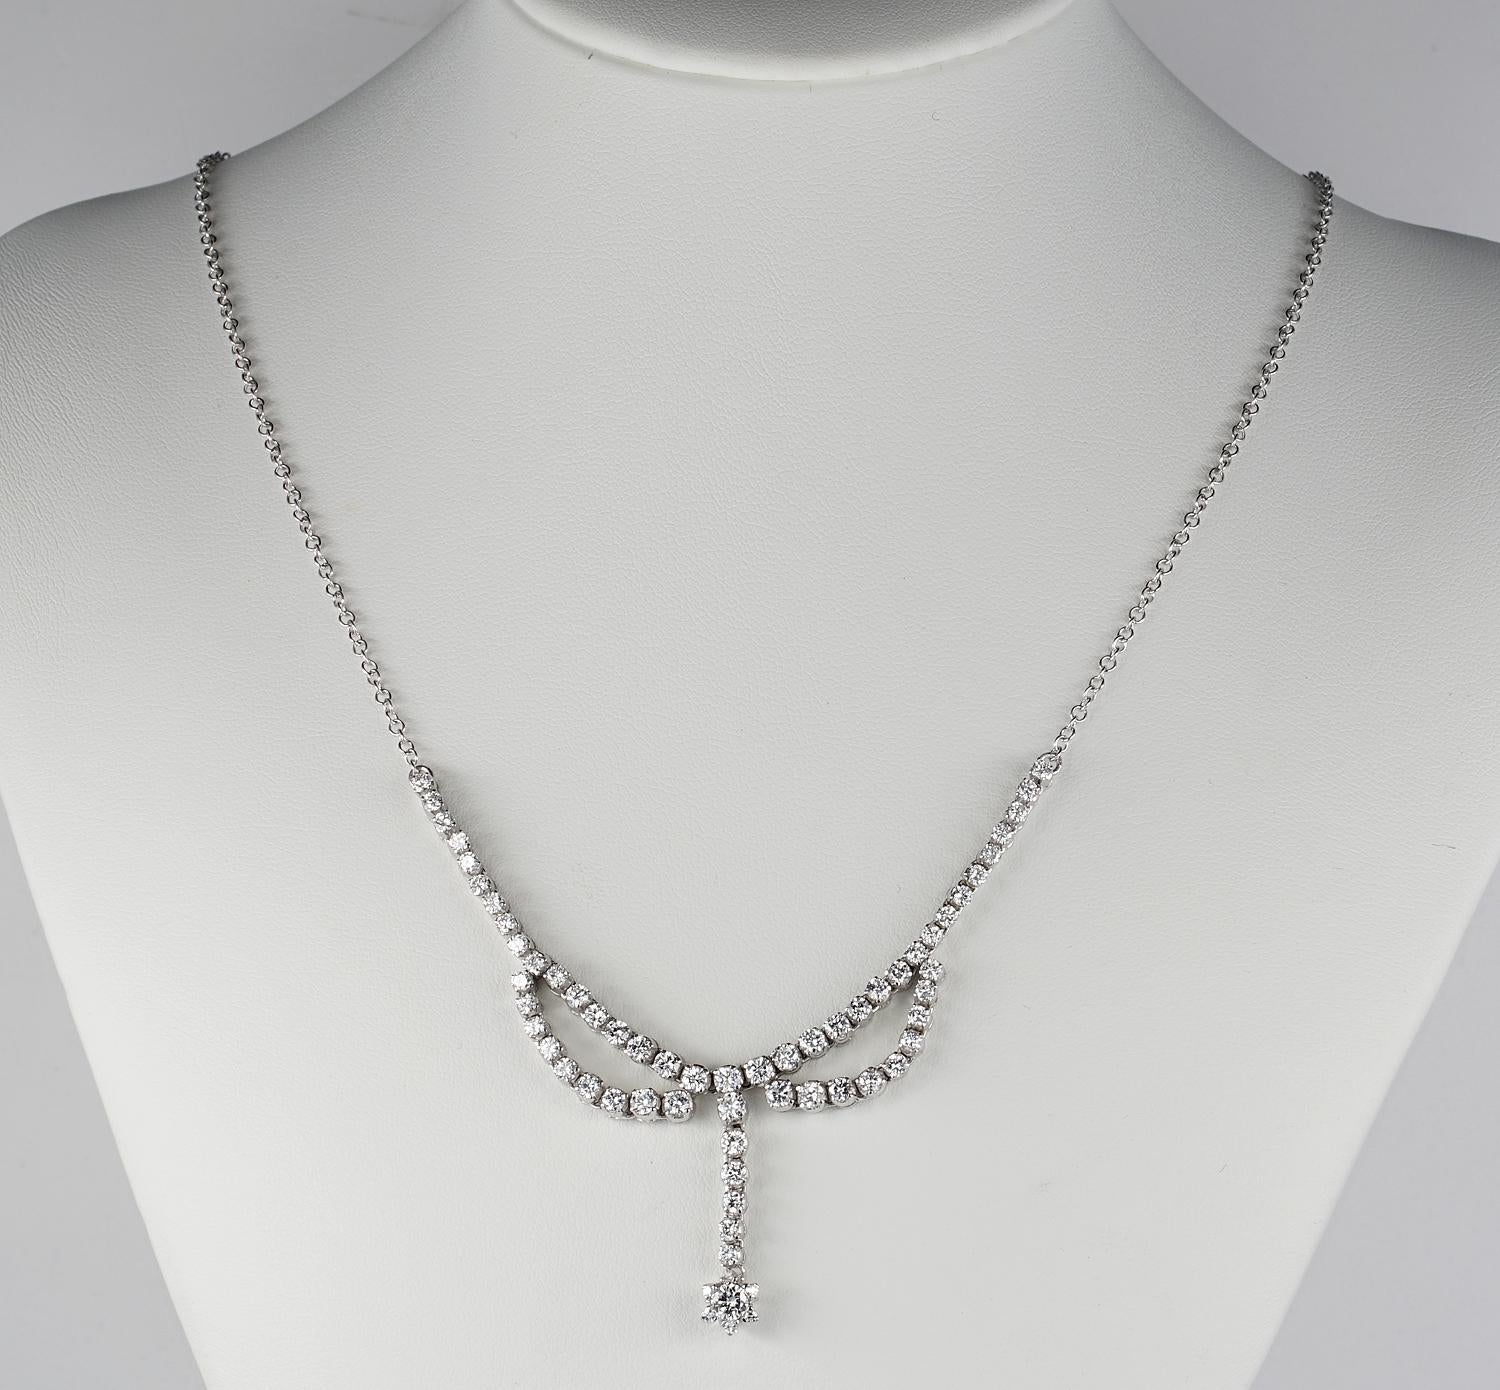 Glance of Brilliance!

Classy, eternal elegance is expressed in this outstanding high quality Diamond necklace
Attractive for all generations since does not fear time passing by
Hand crafted of solid 18 KT white gold, not marked, this piece is